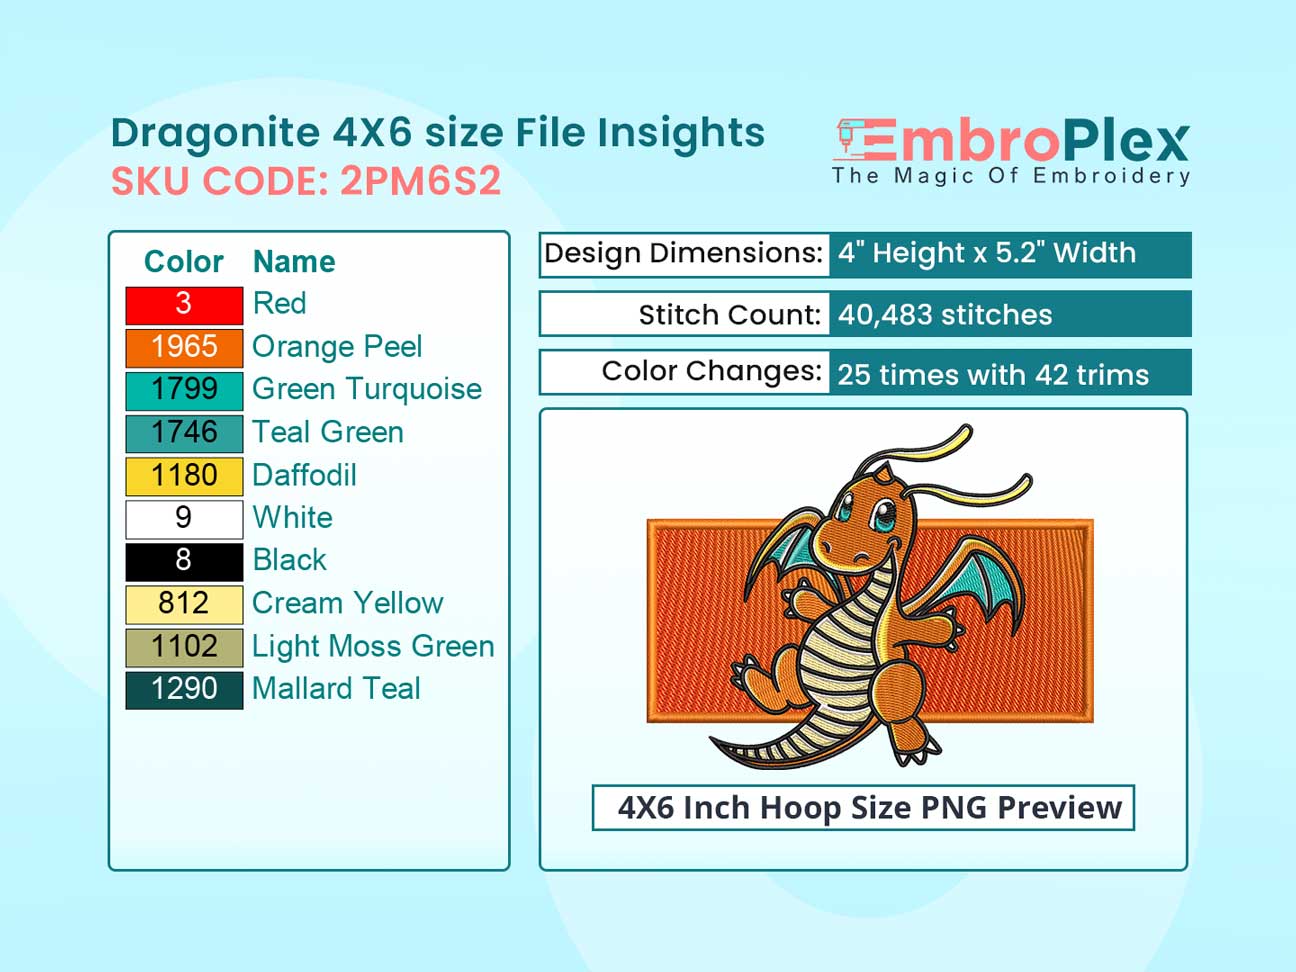 Anime-Inspired Dragonite Embroidery Design File - 4x6 Inch hoop Size Variation overview image